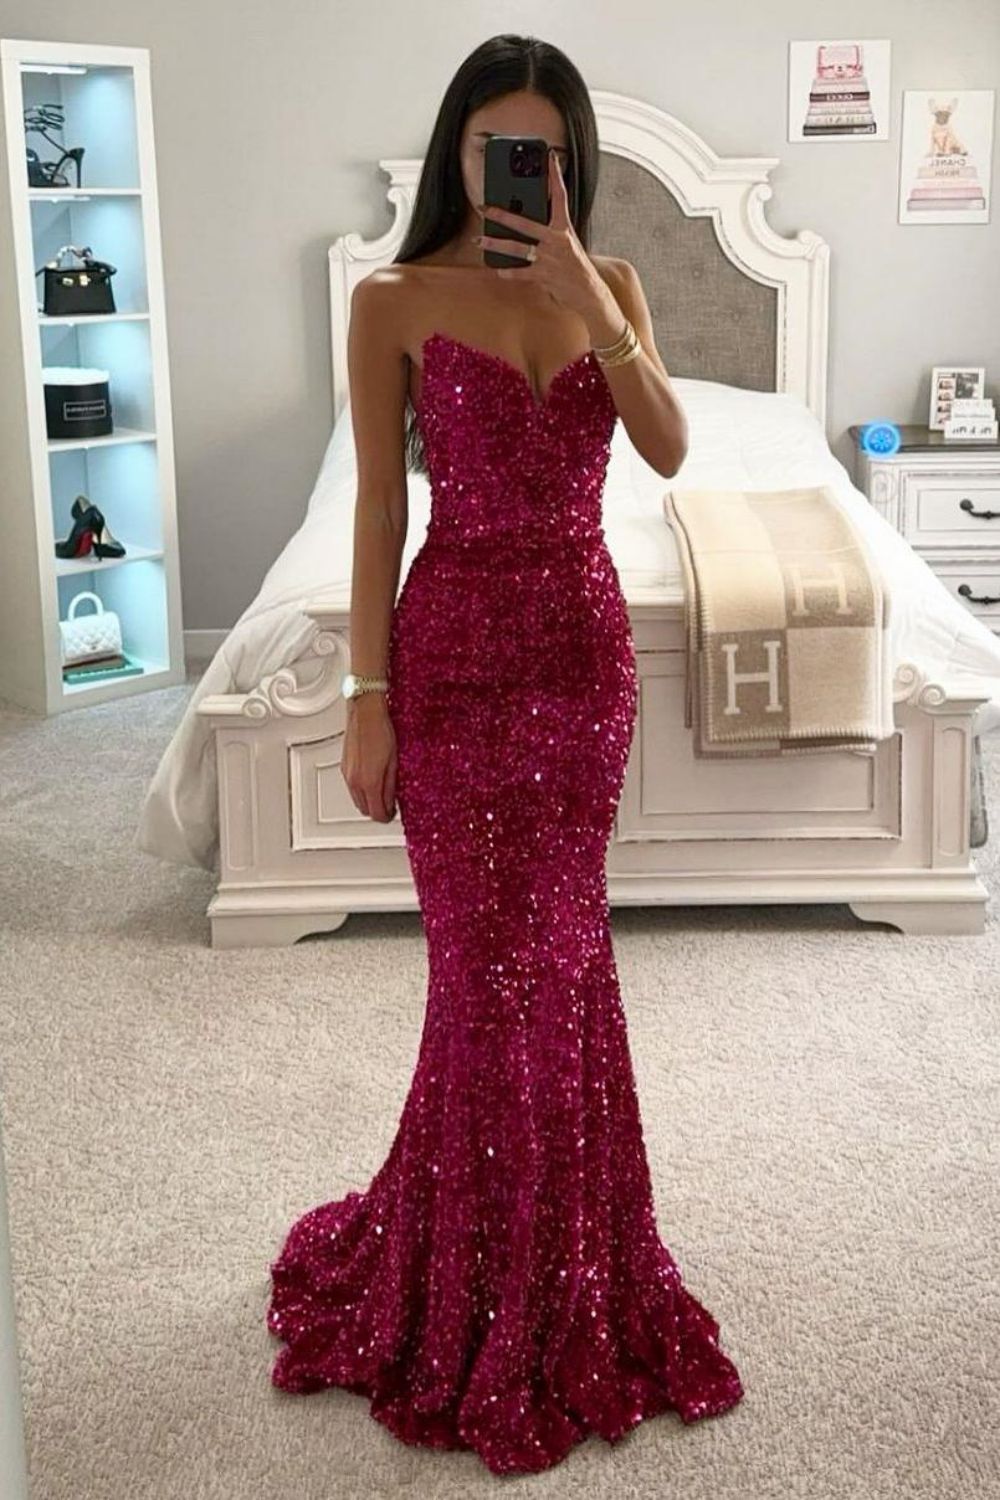 Fuchsia Sparkly Sequin Mermaid Strapless Long Prom Party Dress